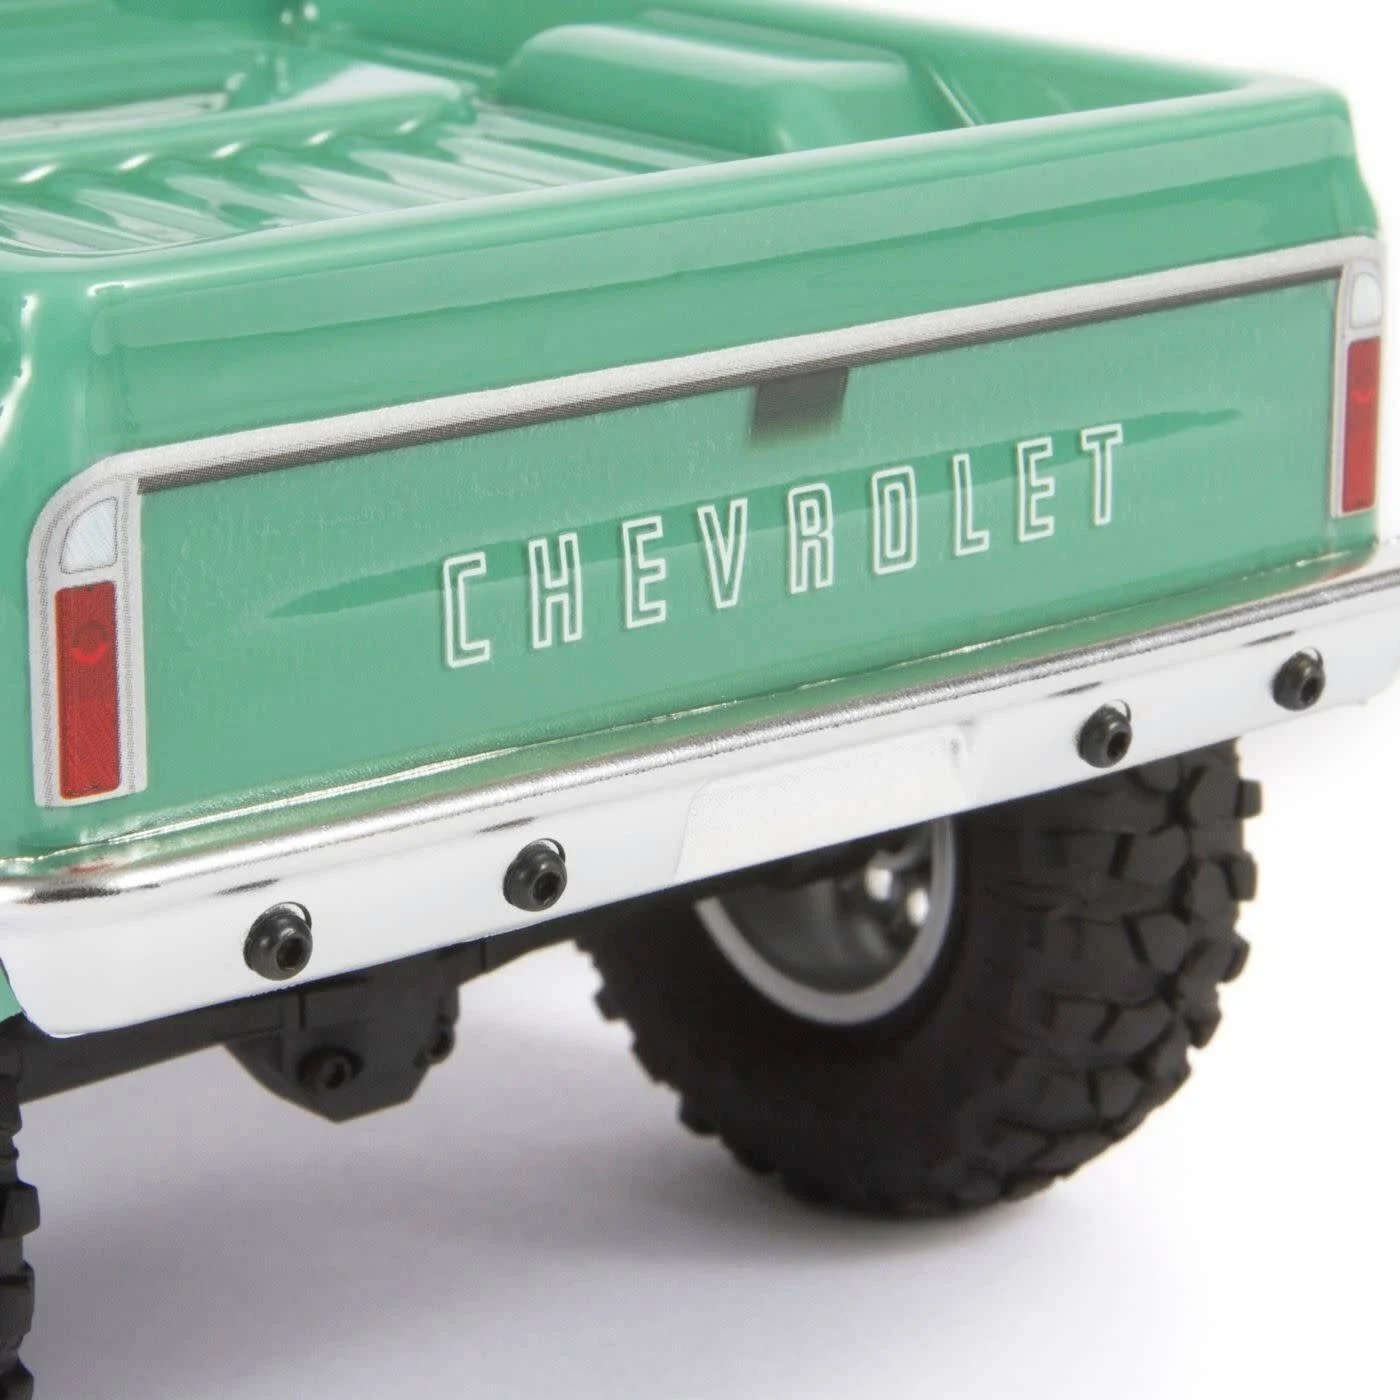 Axial Scx24 1967 Chevrolet C10 1/24 4WD RTR Light Green